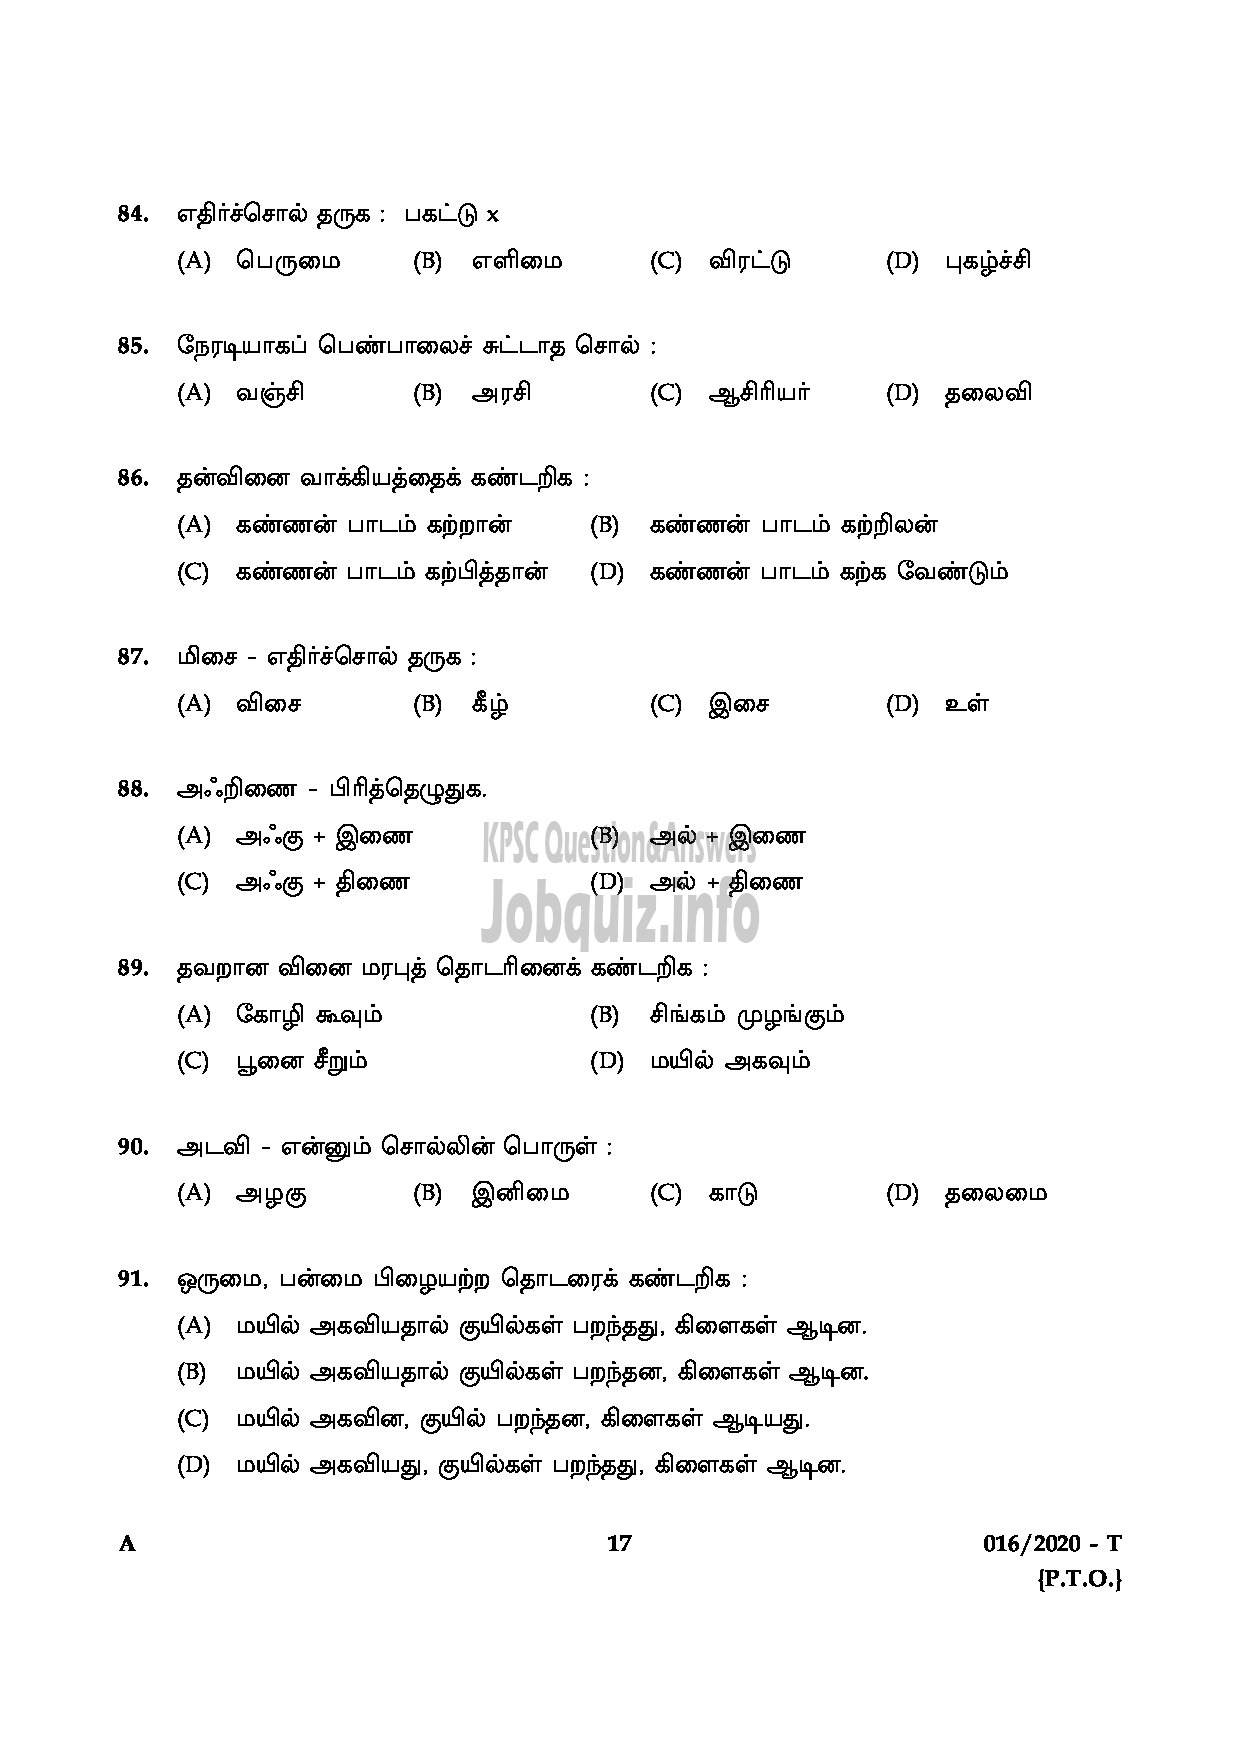 Kerala PSC Question Paper - KAS OFFICER (JUNIOR TIME SCALE) TRAINEE KERALA ADMINISTRATIVE SERVICE ENGLISH / TAMIL-17